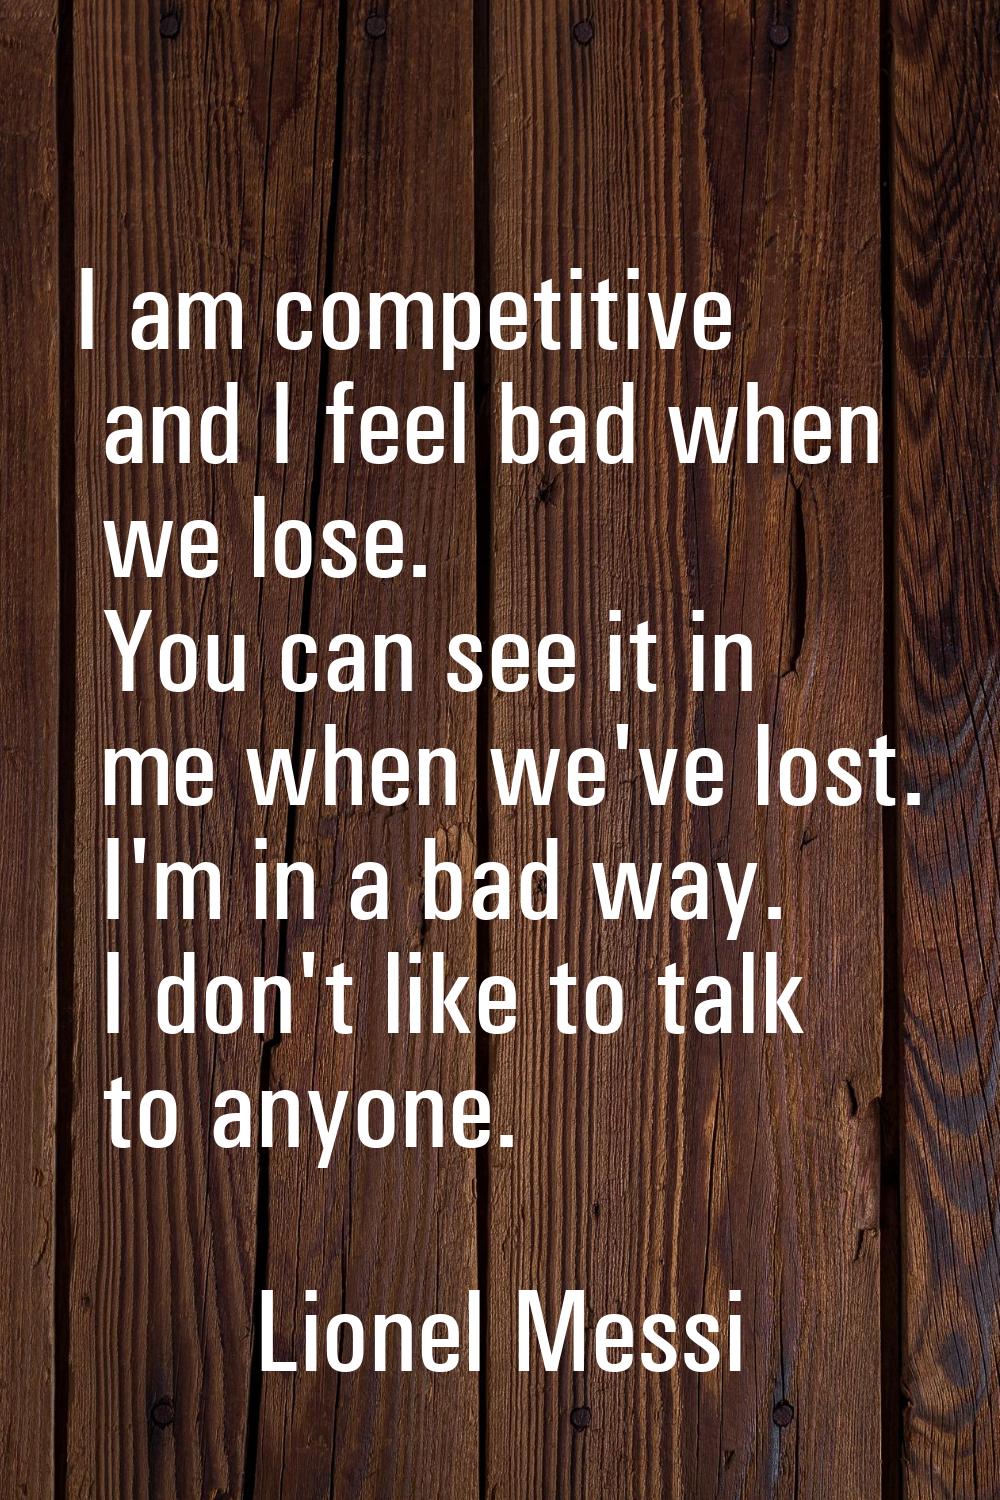 I am competitive and I feel bad when we lose. You can see it in me when we've lost. I'm in a bad wa